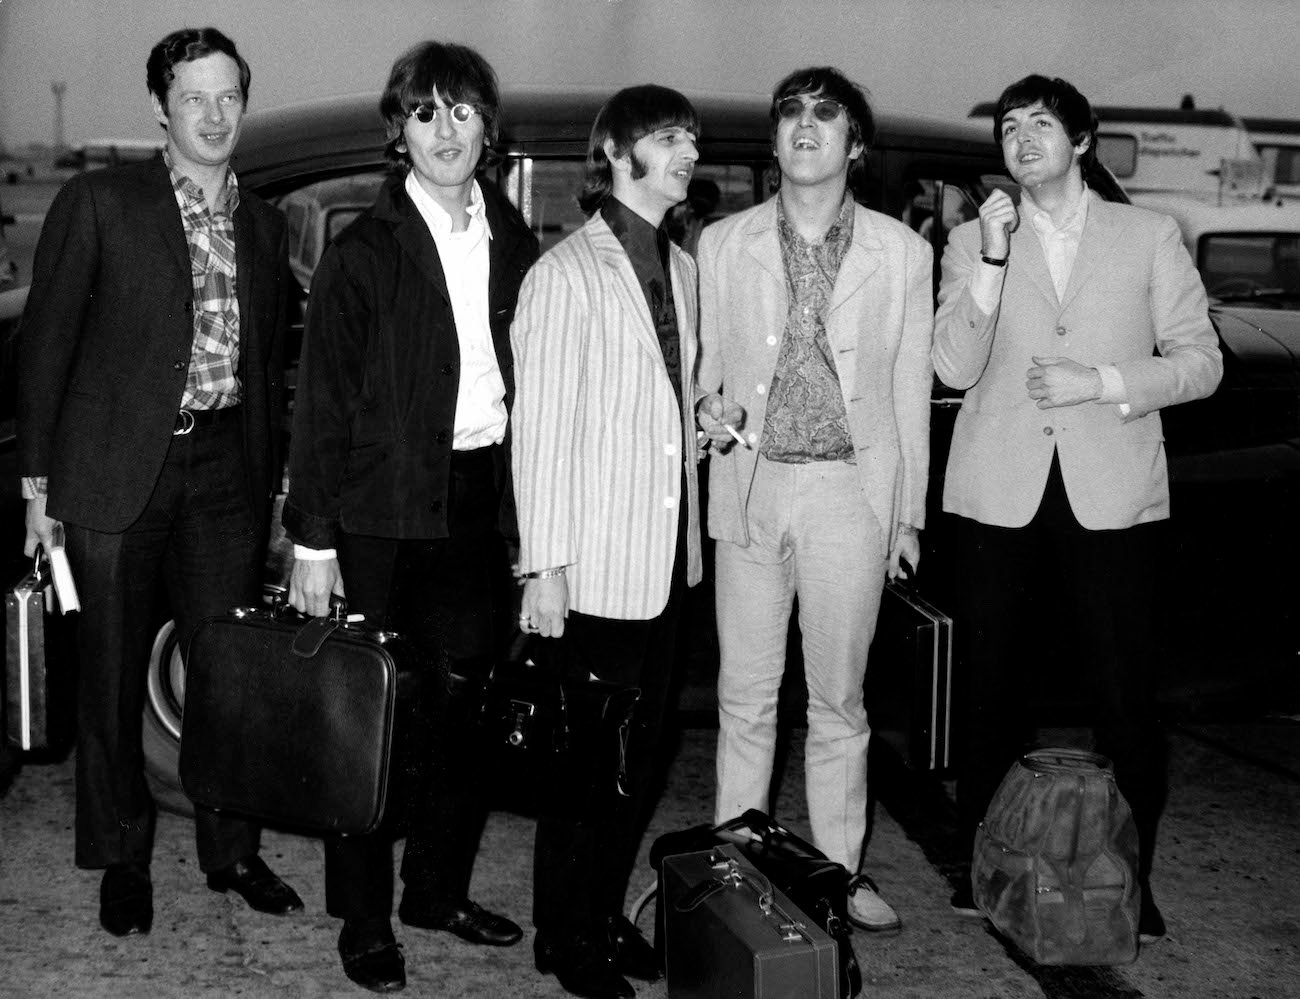 The Beatles and their manager Brian Epstein.